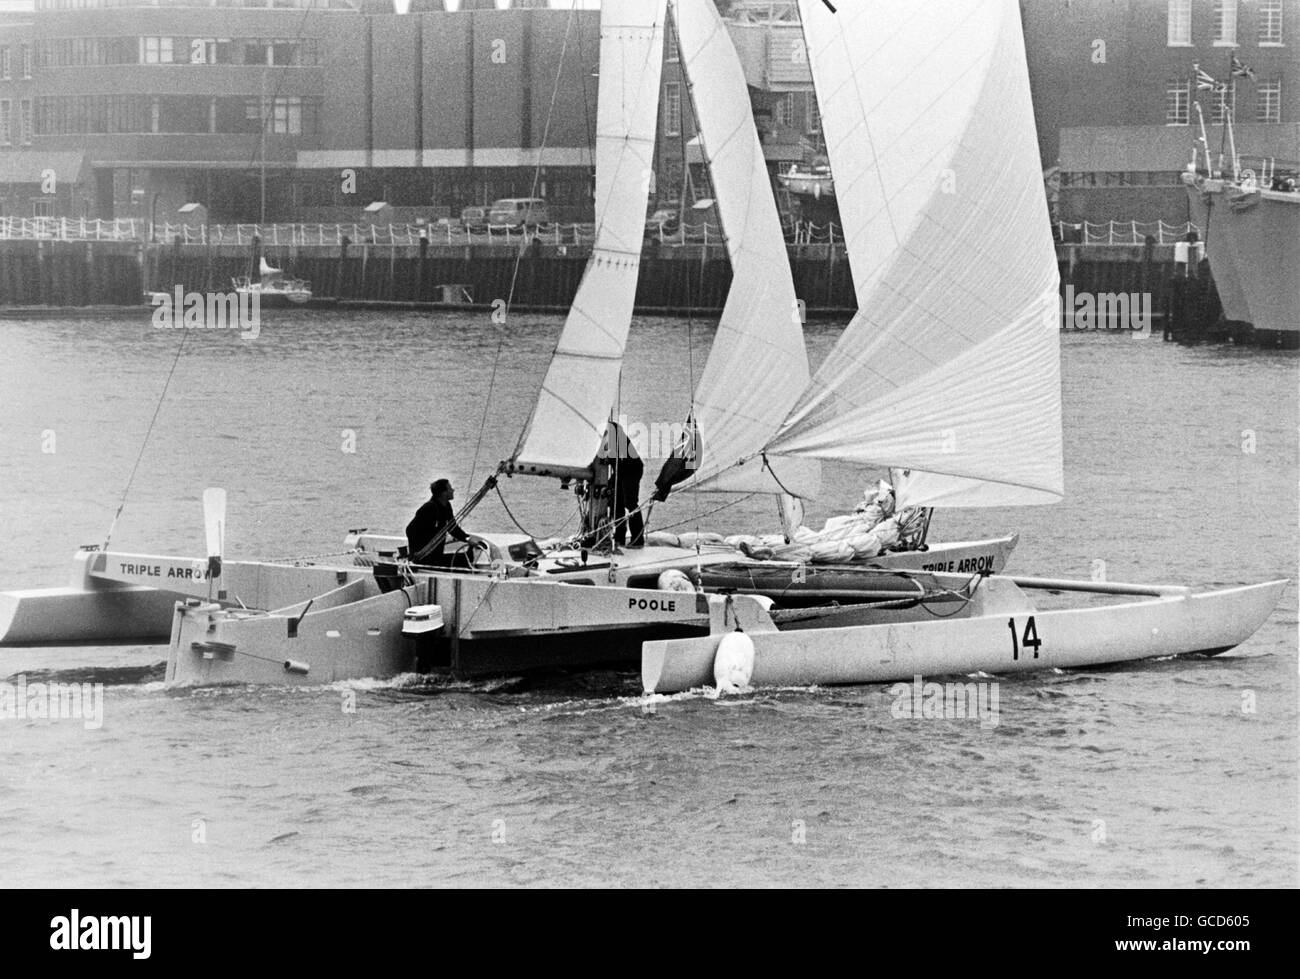 AJAX NEWS PHOTOS. 4TH MAY, 1974. PORTSMOUTH,ENGLAND. - BANK MANAGER SAILOR - BRIAN COOKE AND HIS CREW ERIC JENSEN SAILING THE TRIMARAN TRIPLE ARROW.  PHOTO:JONATHAN EASTLAND/AJAX REF:TRIPLE ARROW 1974 1 NOTE** FEBRUARY 20, 1976. LONE SAILOR FEARED DROWNED - 54 YEAR OLD BANK MANAGER BRIAN COOKE OF PARKSTONE, DORSET WAS FEARED DROWNED TODAY AFTER HIS TRIMARAN TRIPLE ARROW WAS FOUND CAPSIZED 450 MILES WEST OF CANARY ISLANDS BY A NORWEGIAN BULK CARRIER.  COOKE, A VETERAN OCEAN RACER, SET SAIL FROM PLYMOUTH,ENGLAND ON DECEMBER 7/75 ON HIS SECOND ATTEMPT TO BEAT THE ATLANTIC SPEED AND DISTANCE TRIAL Stock Photo